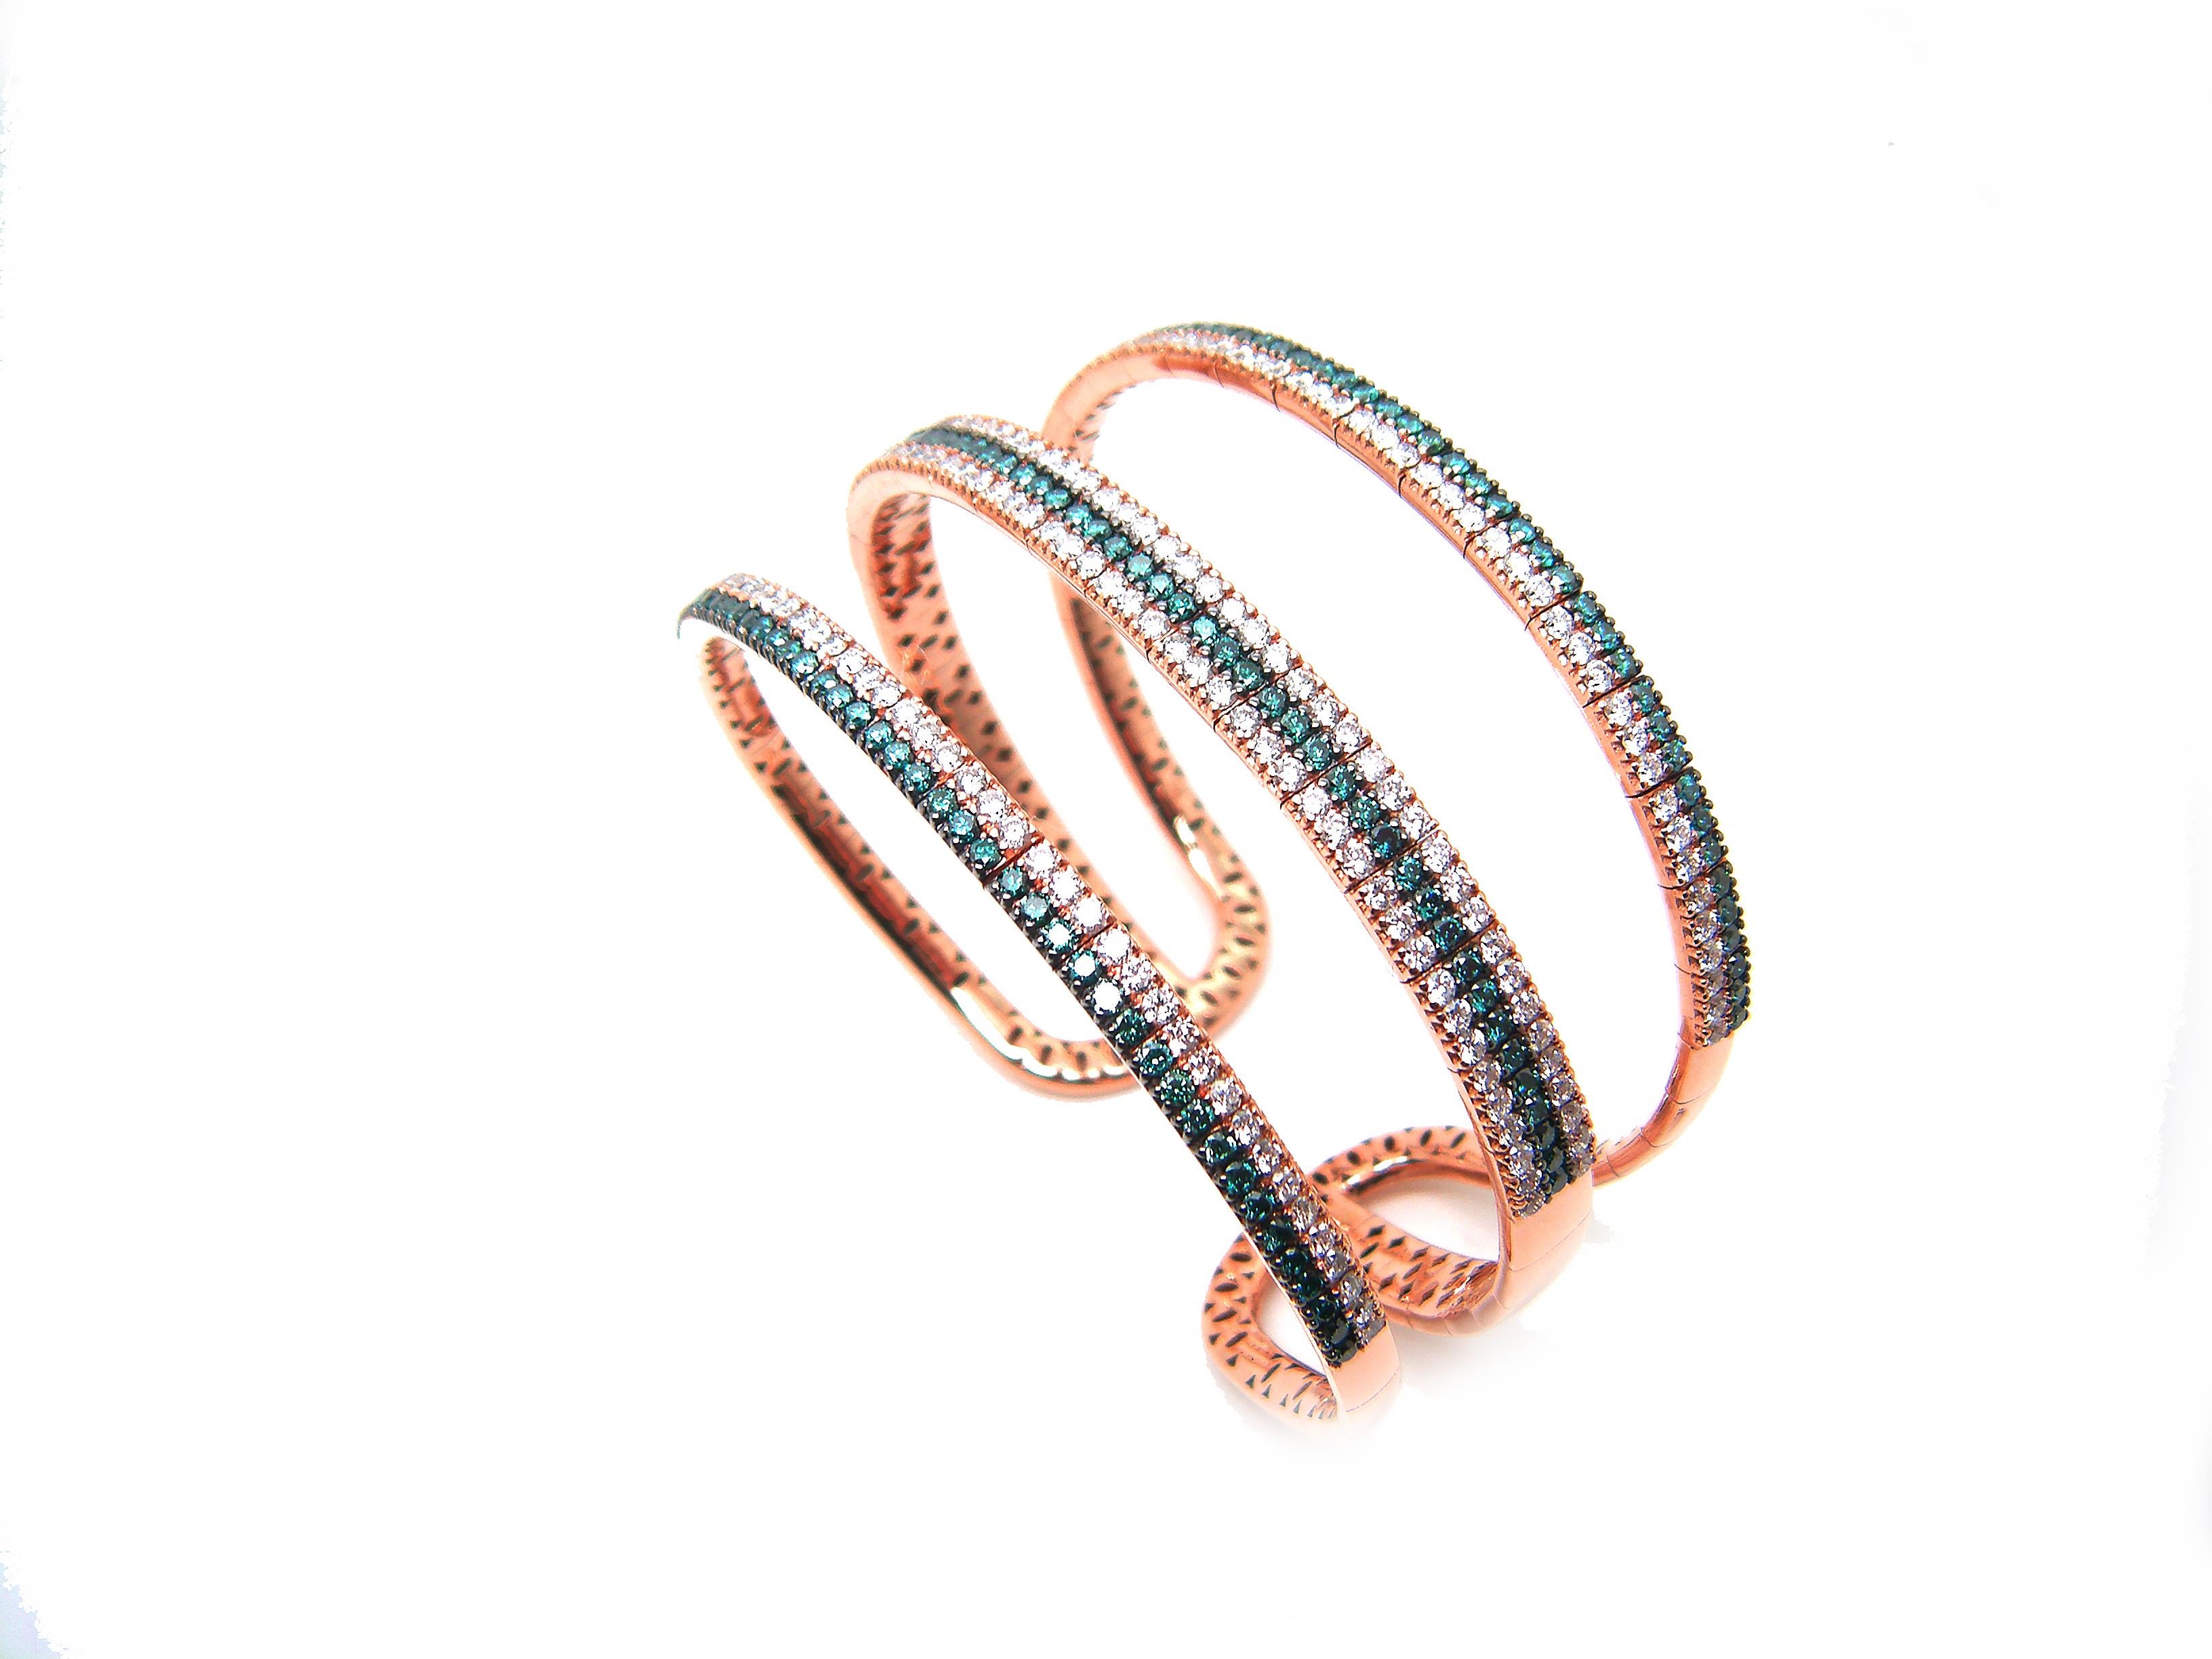 This S.Georgios designer wide bangle bracelet is rose gold 18 karats with brilliant-cut white and blue diamonds all handmade in a unique design. The gorgeous cuff Bracelet is custom made and has brilliant cut white diamonds total weight of 3.64